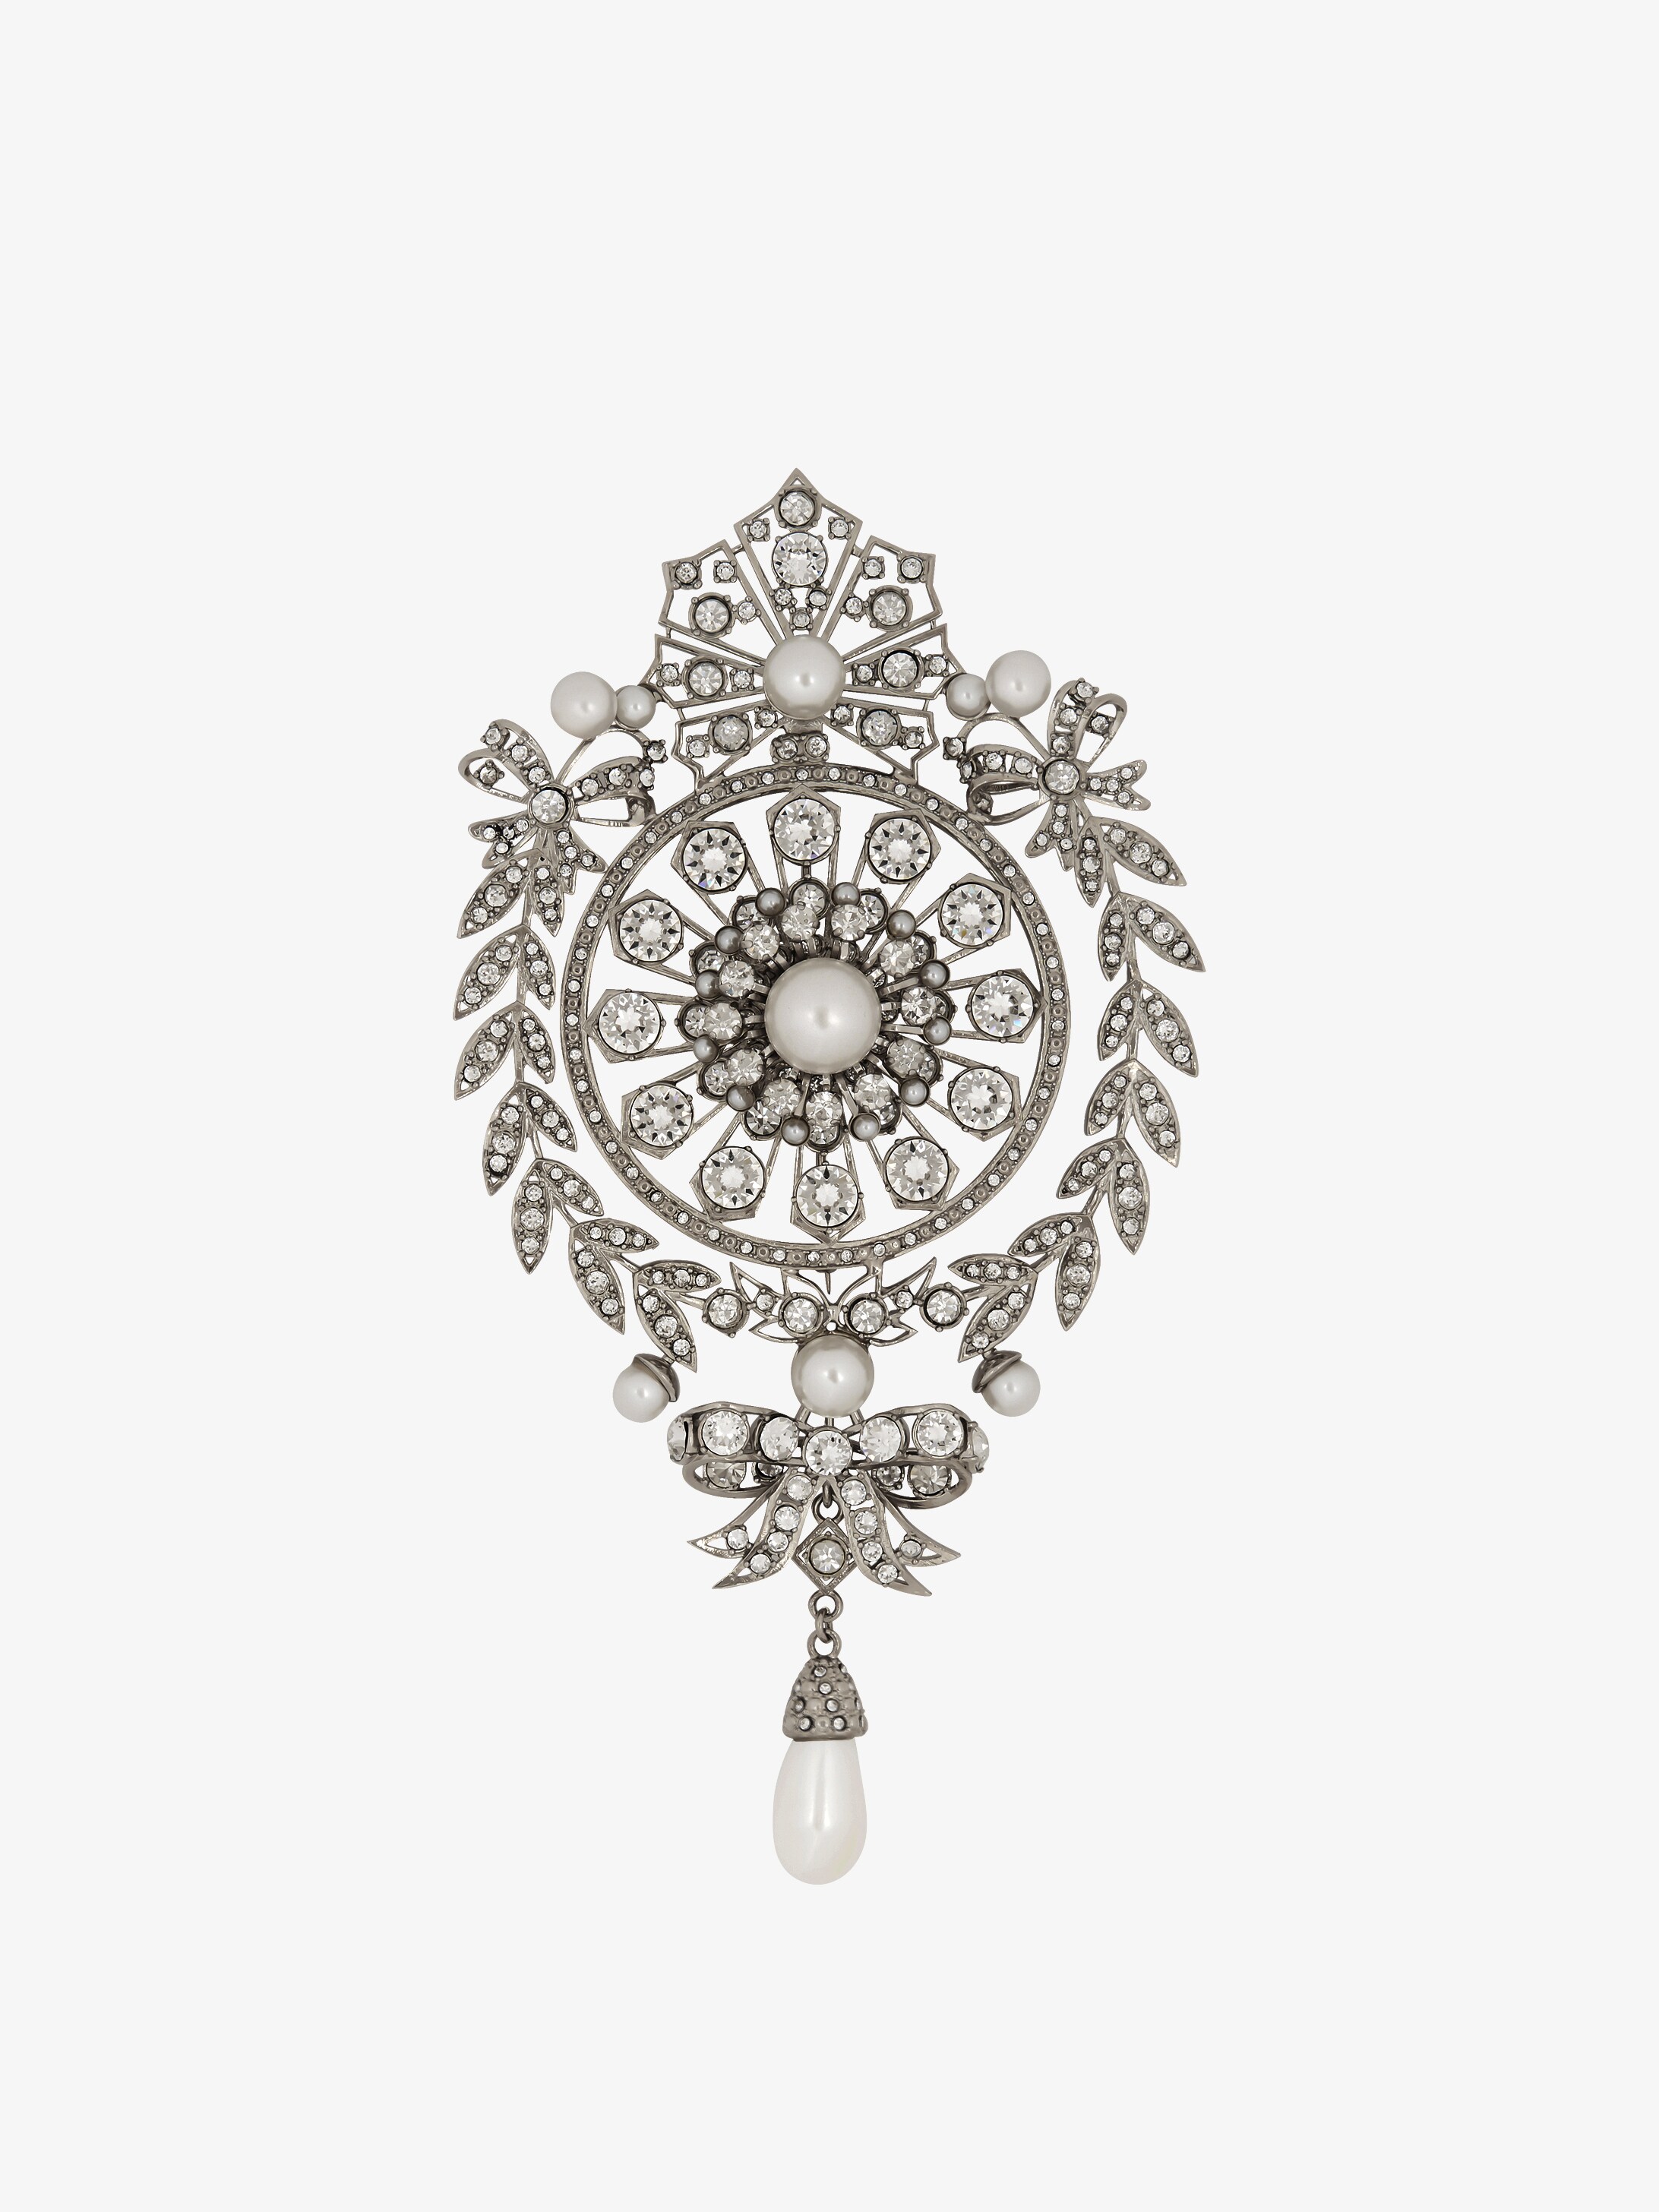 Givenchy Classic brooch | GIVENCHY Paris